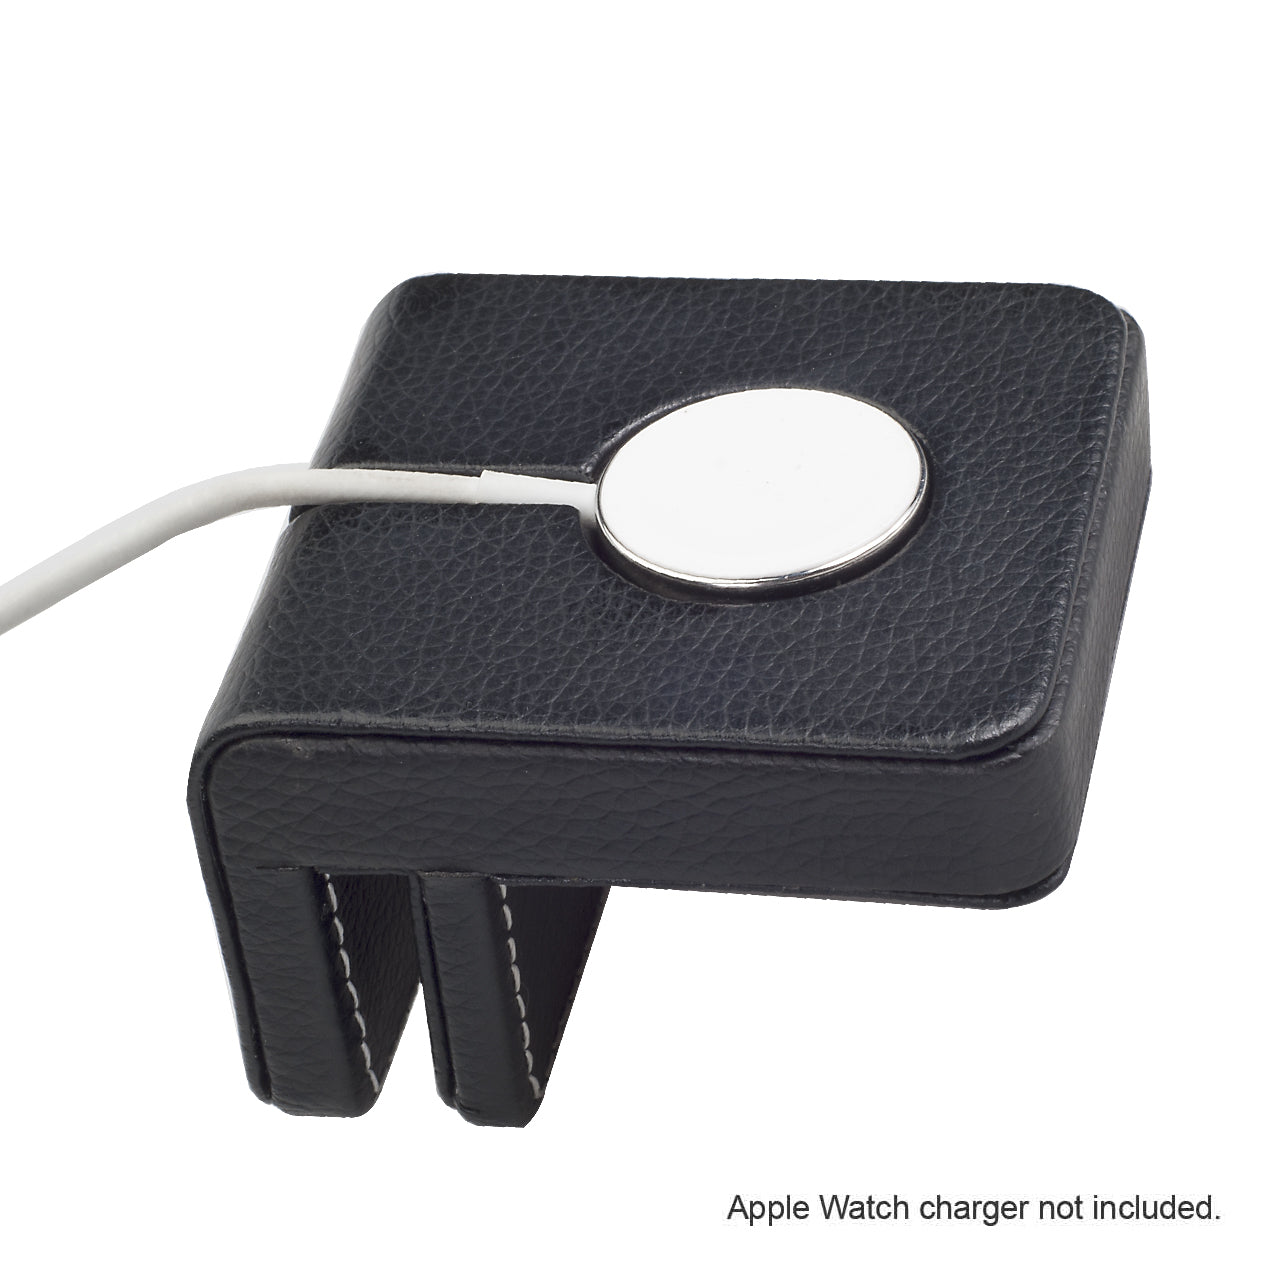 Executive Slim Charging Stand & Apple Watch Adapter Combo